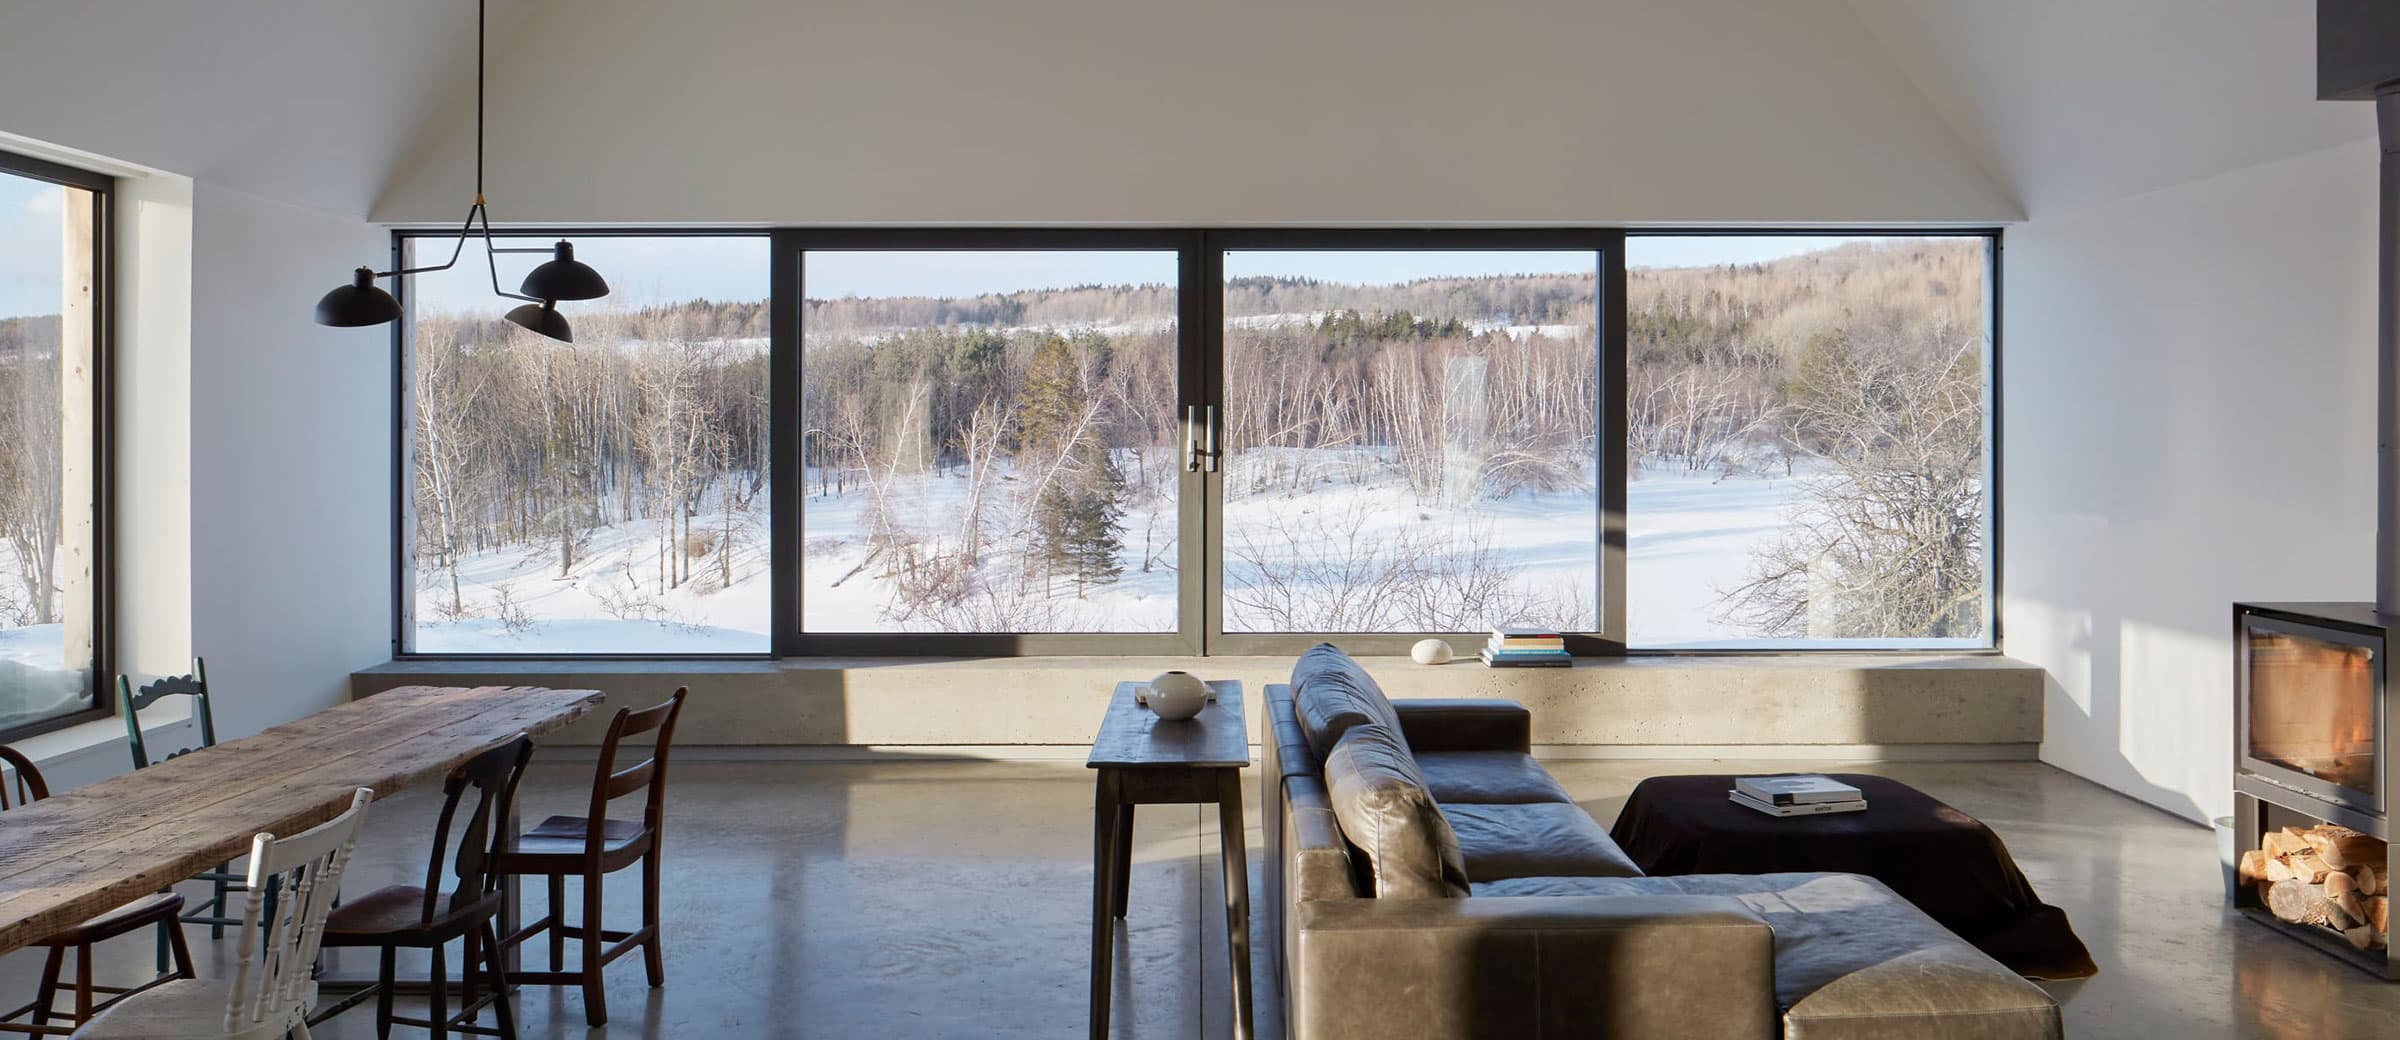 Living area with large windows overlooking snowy landscape